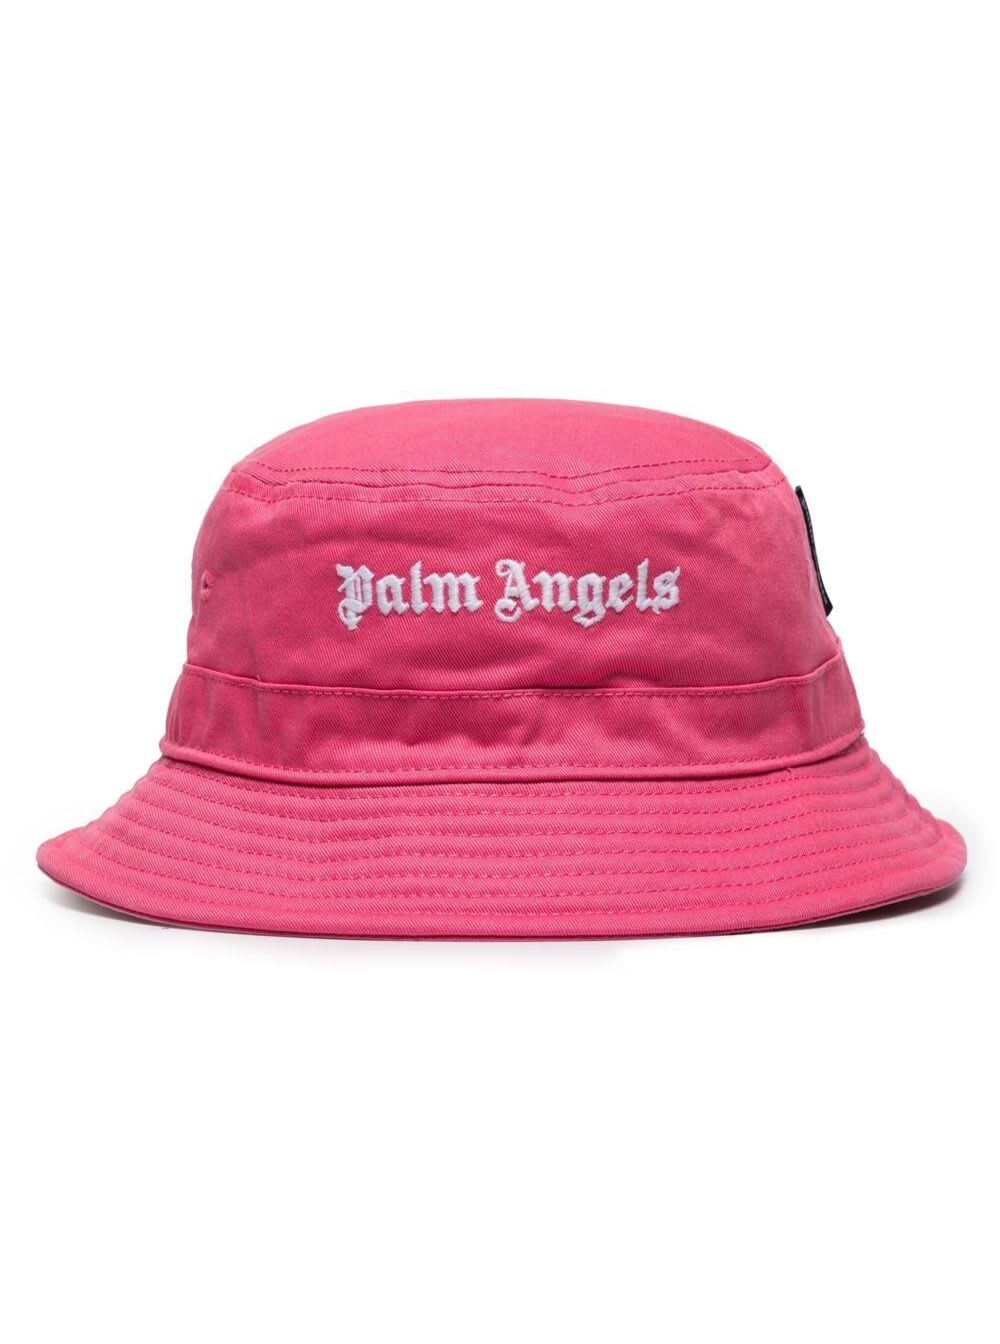 Palm Angels Womans Fuxia Cotton Bucket Hat Black With Classic Logo